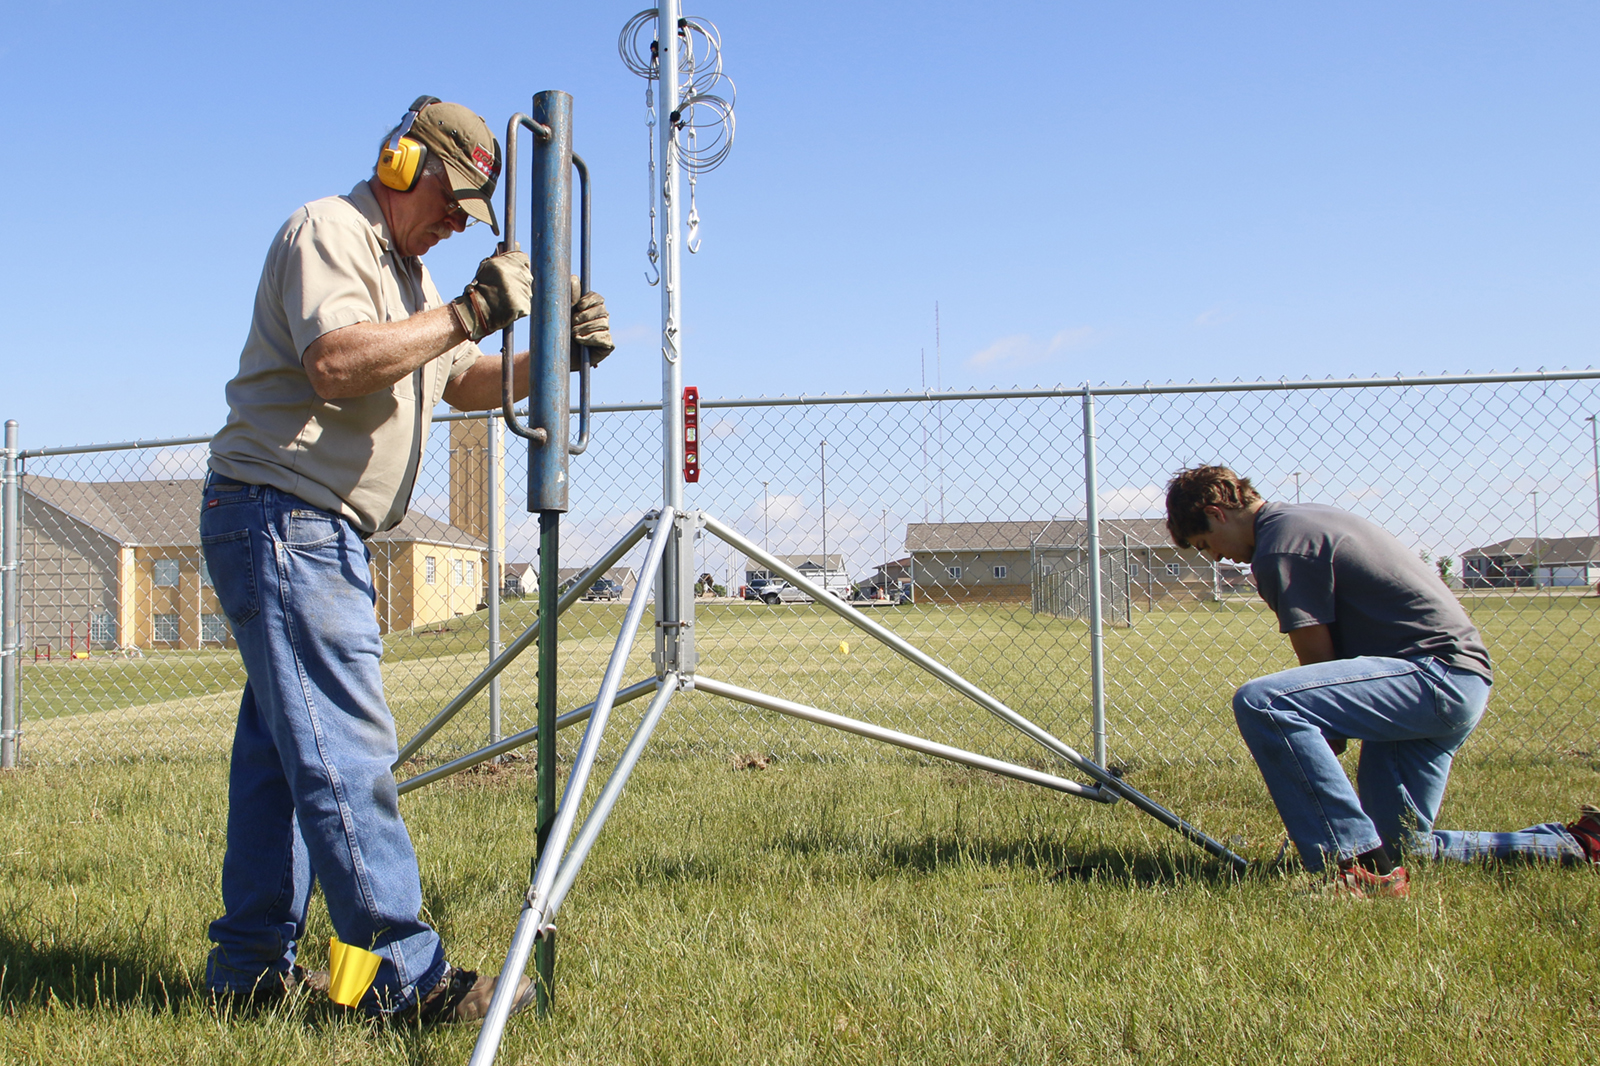 Glen Roebke, left, mesonet technician, and Regan Kerkman, NSCO student intern, install a weather station at St. Michael's Catholic Church property south of Lincoln in summer 2018. | Shawna Richter-Ryerson, Natural Resources